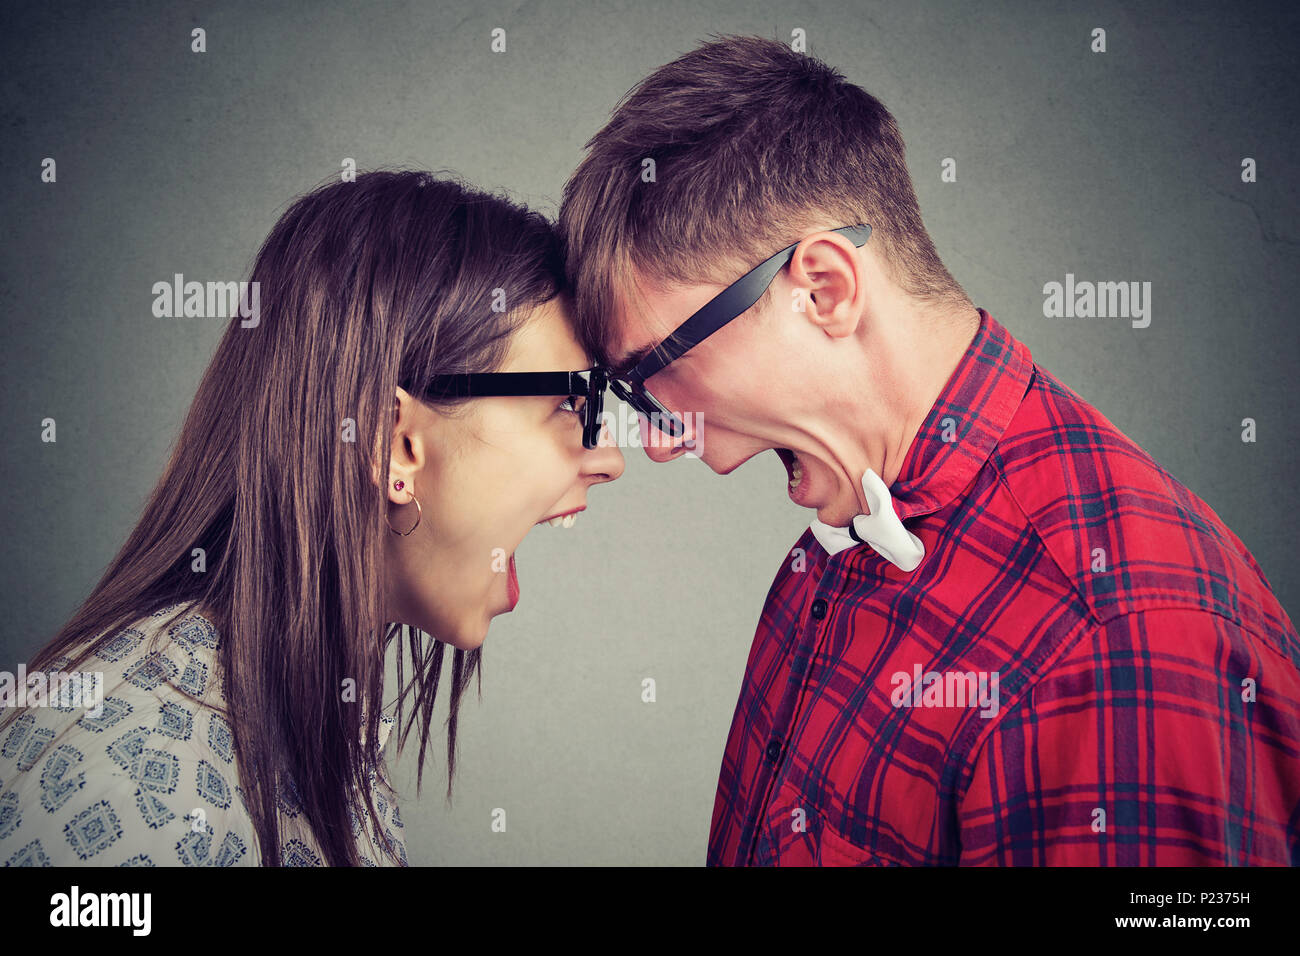 Side view of man and woman in glasses yelling at each other standing head to head in quarrel. Stock Photo